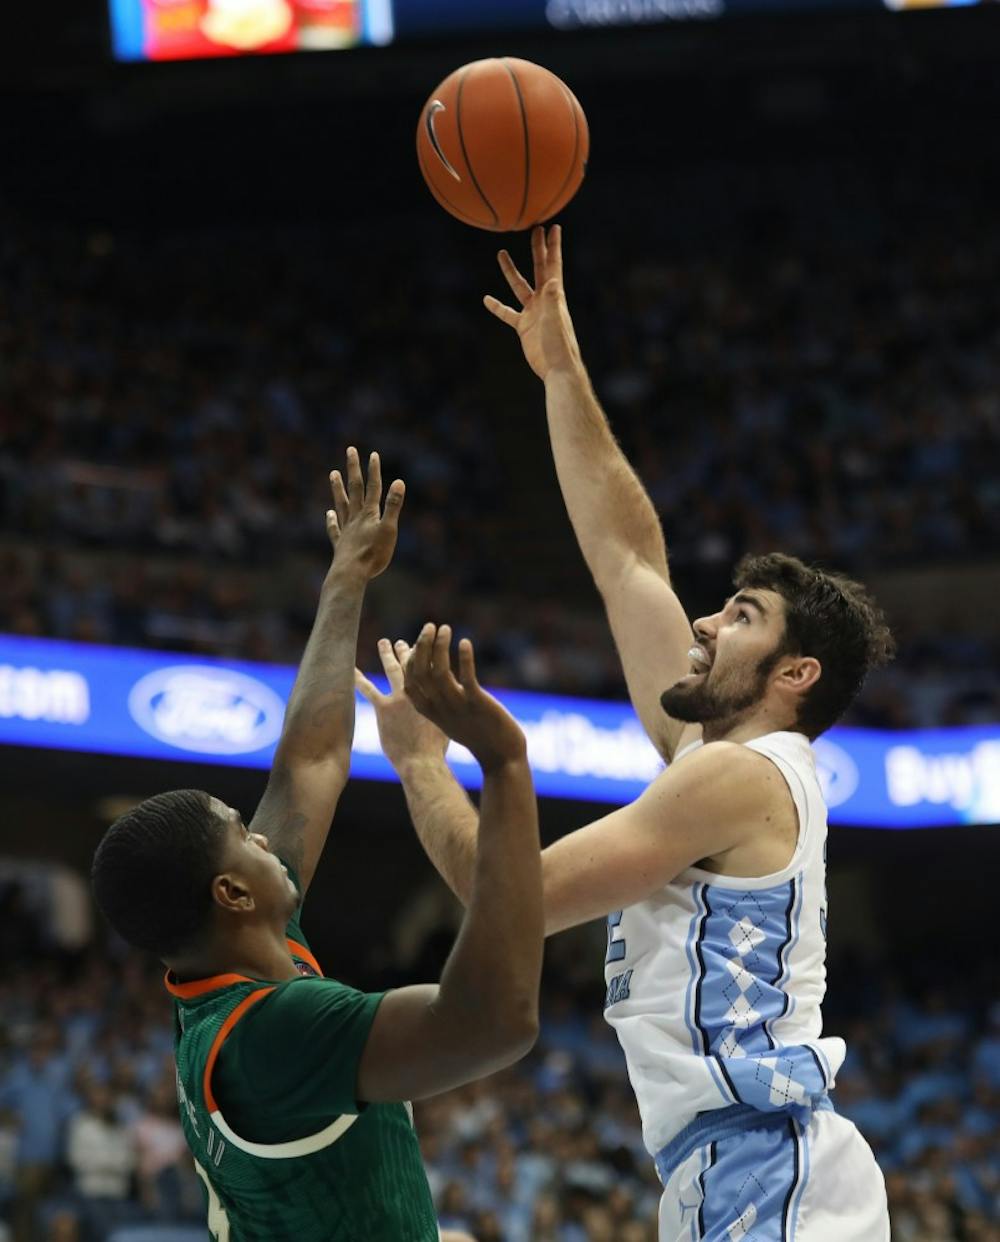 Miami senior guard Anthony Lawrence II (3) attempts to block a shot by UNC senior forward Luke Maye (32) on Saturday, Feb. 9, 2019 in the Smith Center. UNC men's basketball defeated Miami 88-85 in overtime. Maye scored 20 points for the Tar Heels.